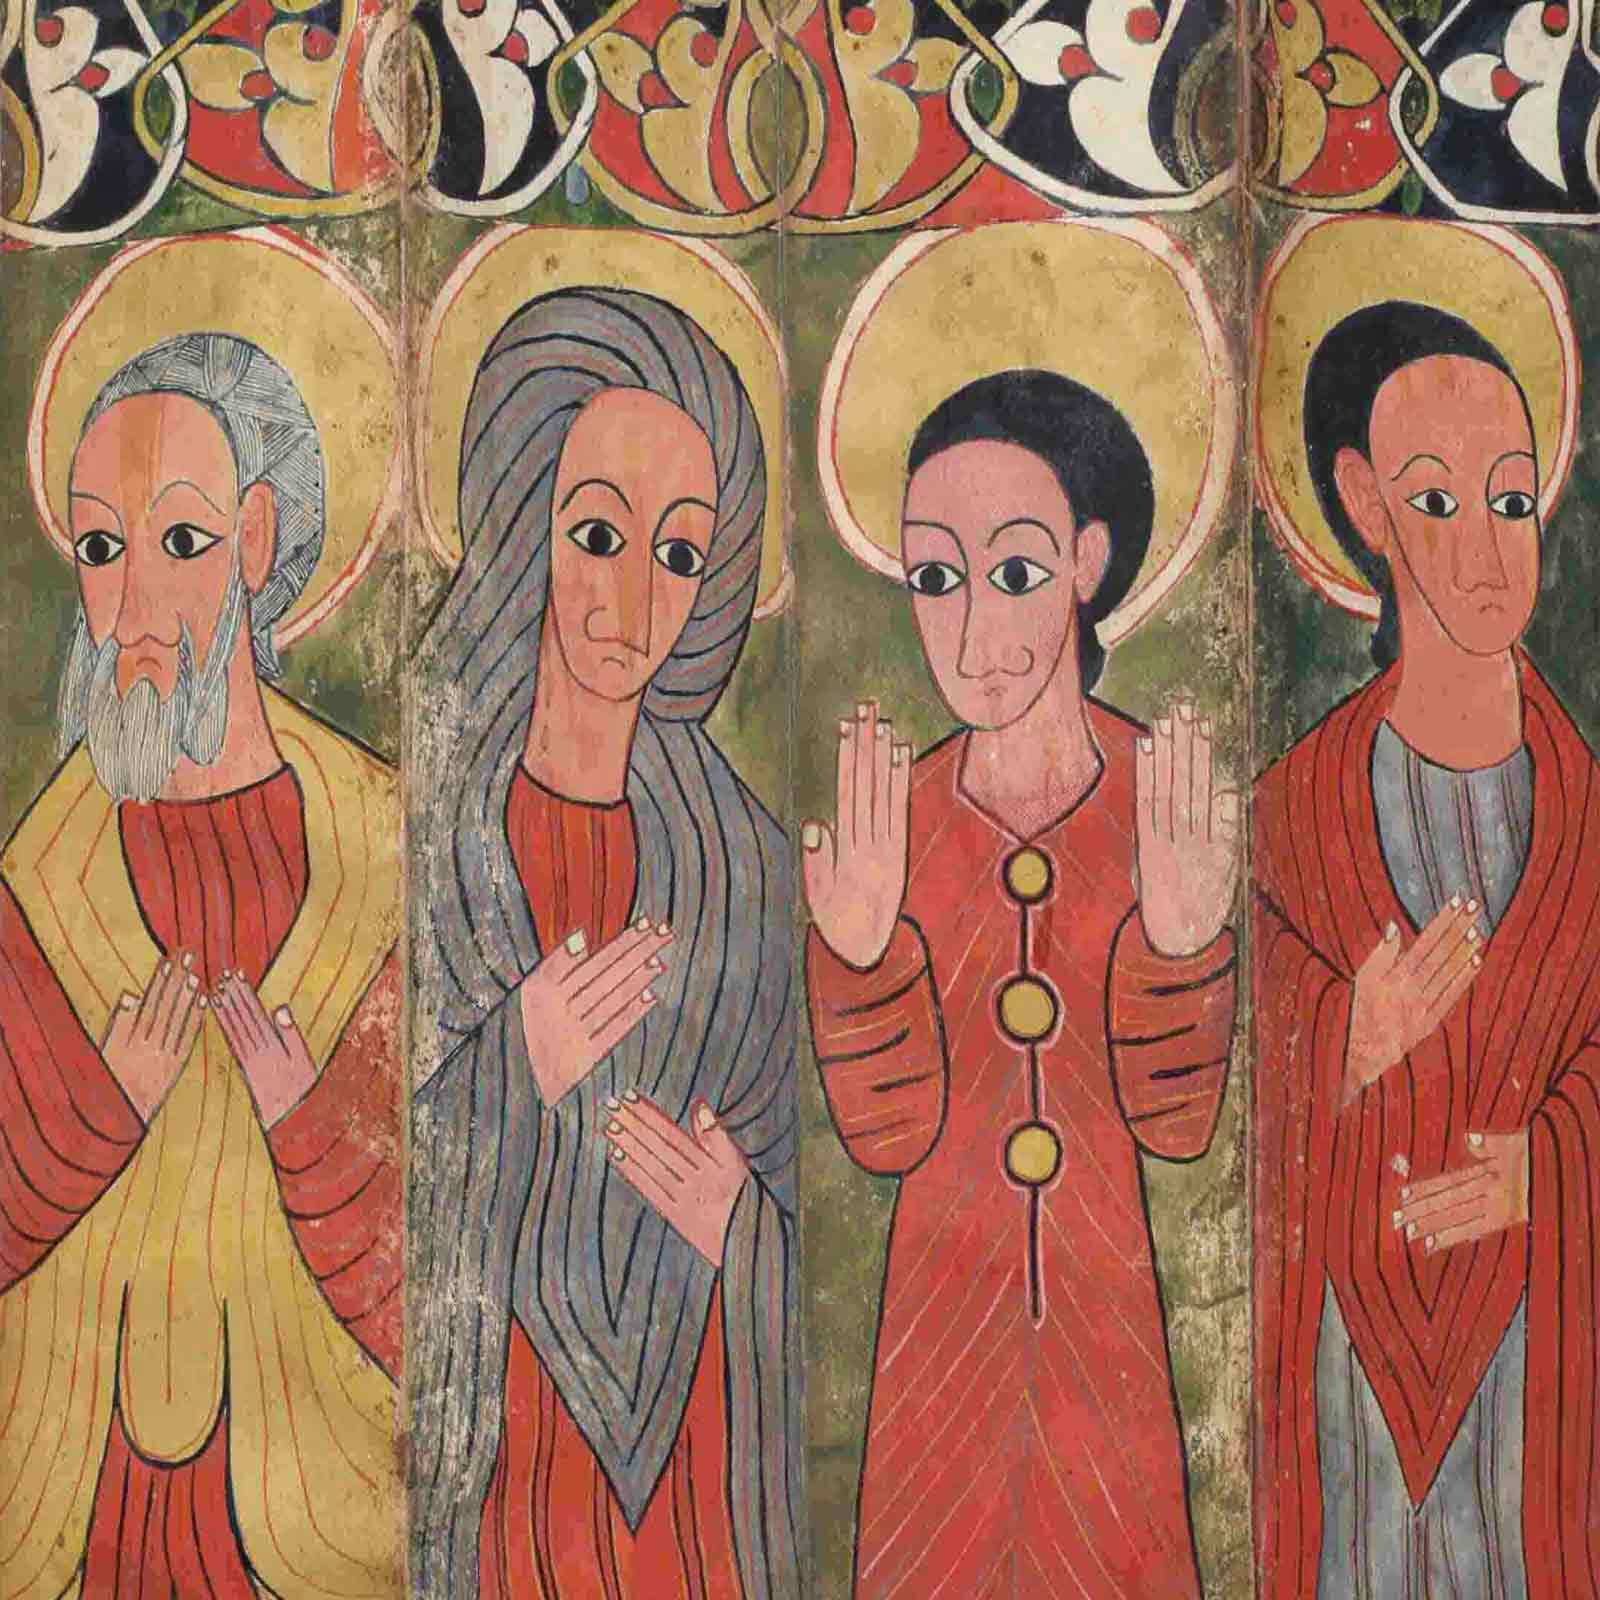 Discover traditional Ethiopian religious paintings featuring four stylized figures adorned with halos.